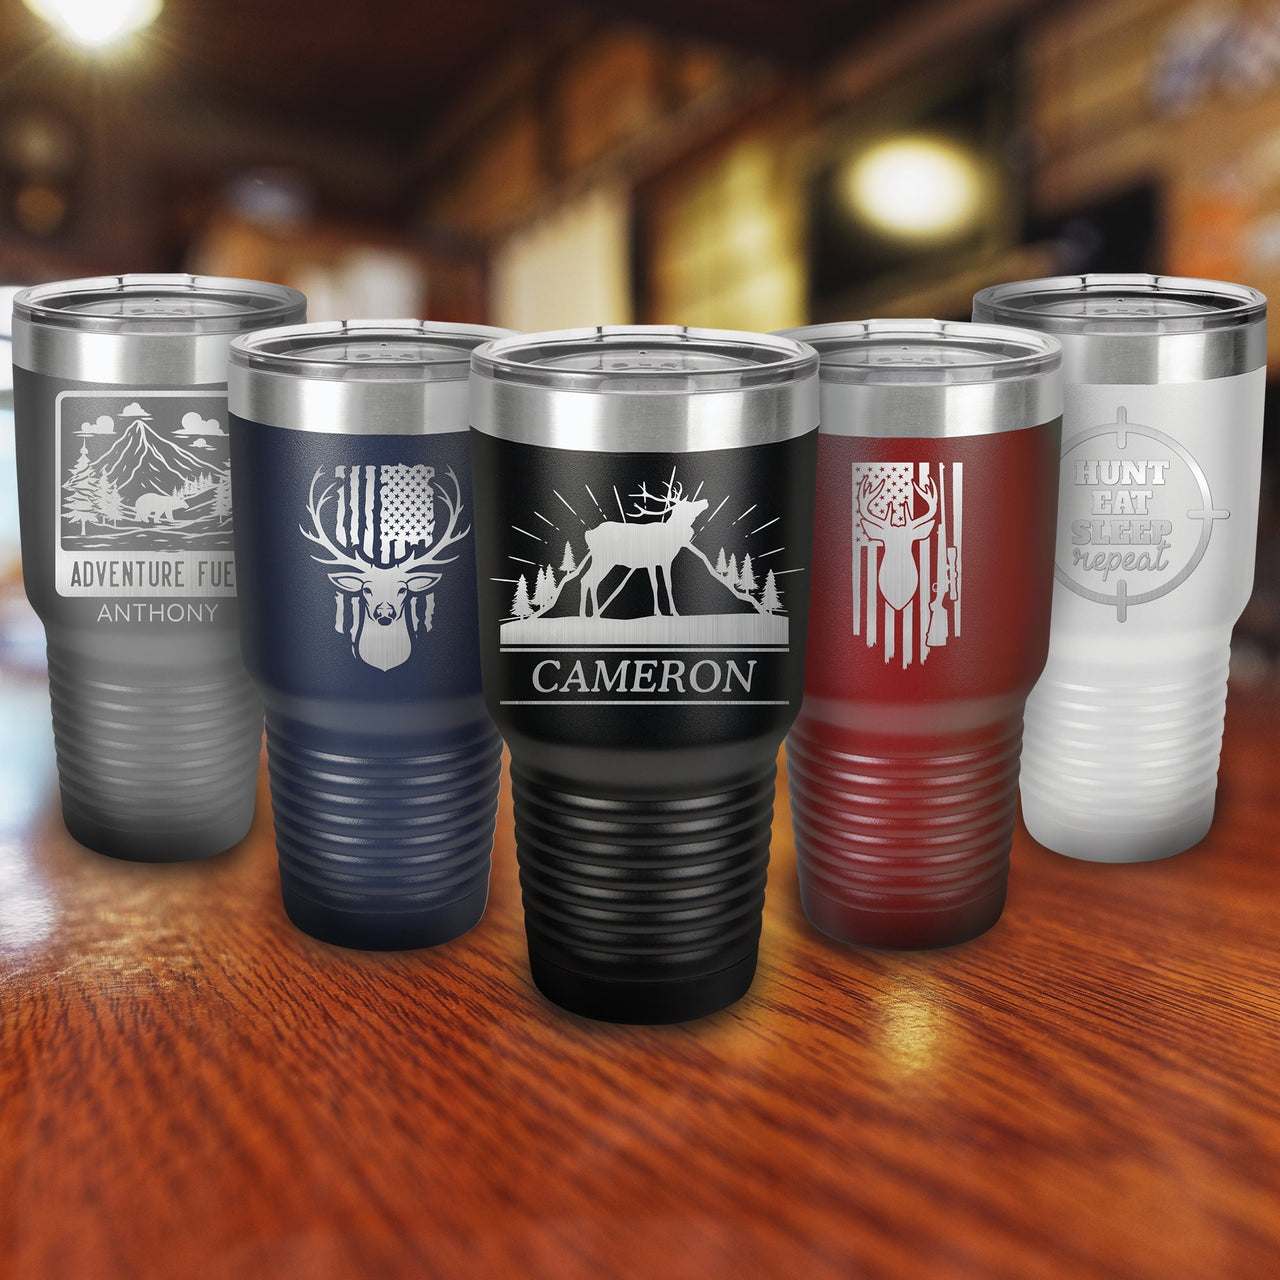 There is Always Time For Hunting Tumbler Gift For Hunters |  Engraved Hunting Cups